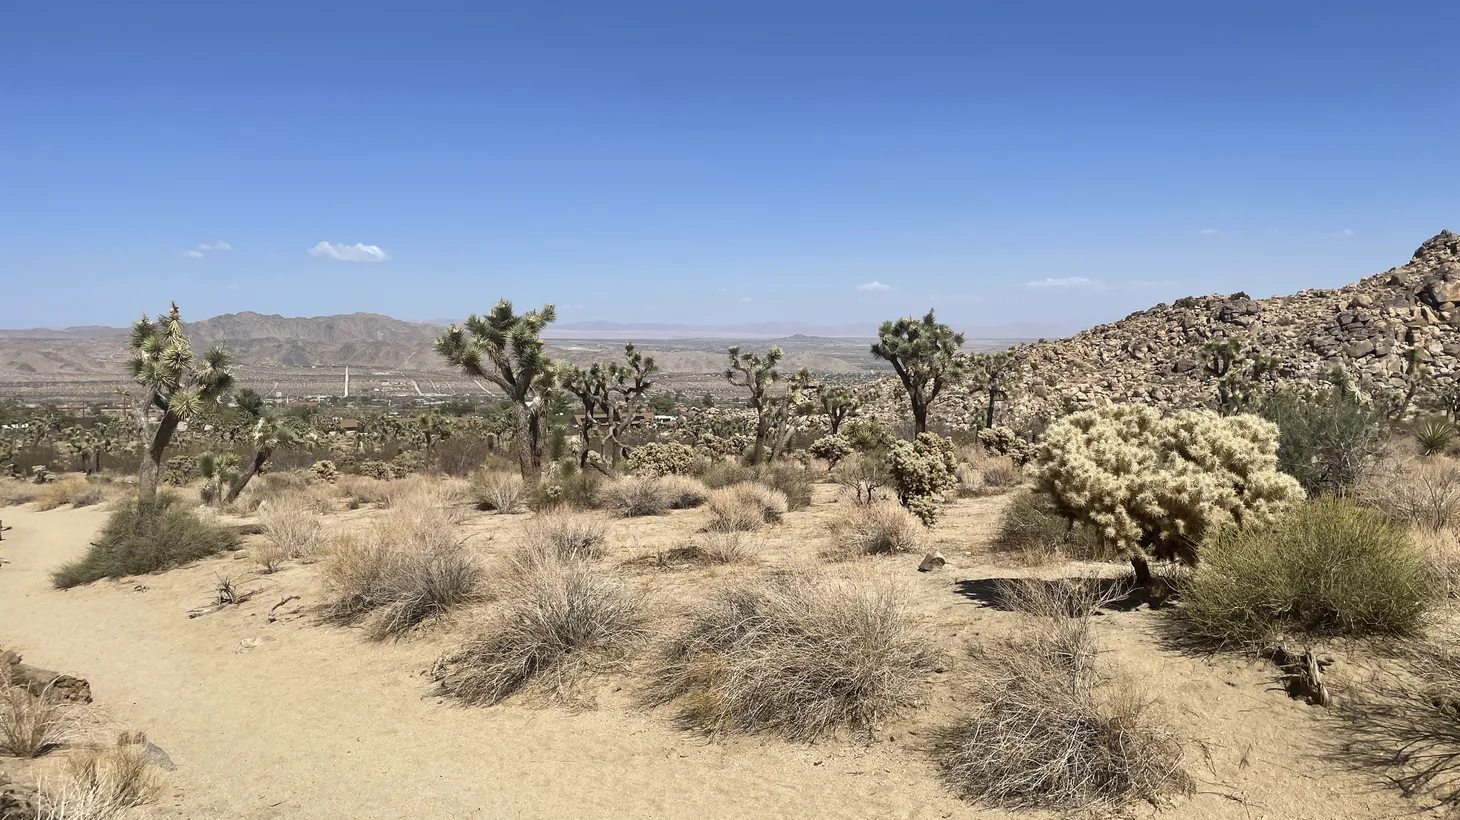 By the year 2100, 80% of the iconic plants will be gone in the national park that straddles the Colorado Desert and the Mojave Desert, according to recent studies.